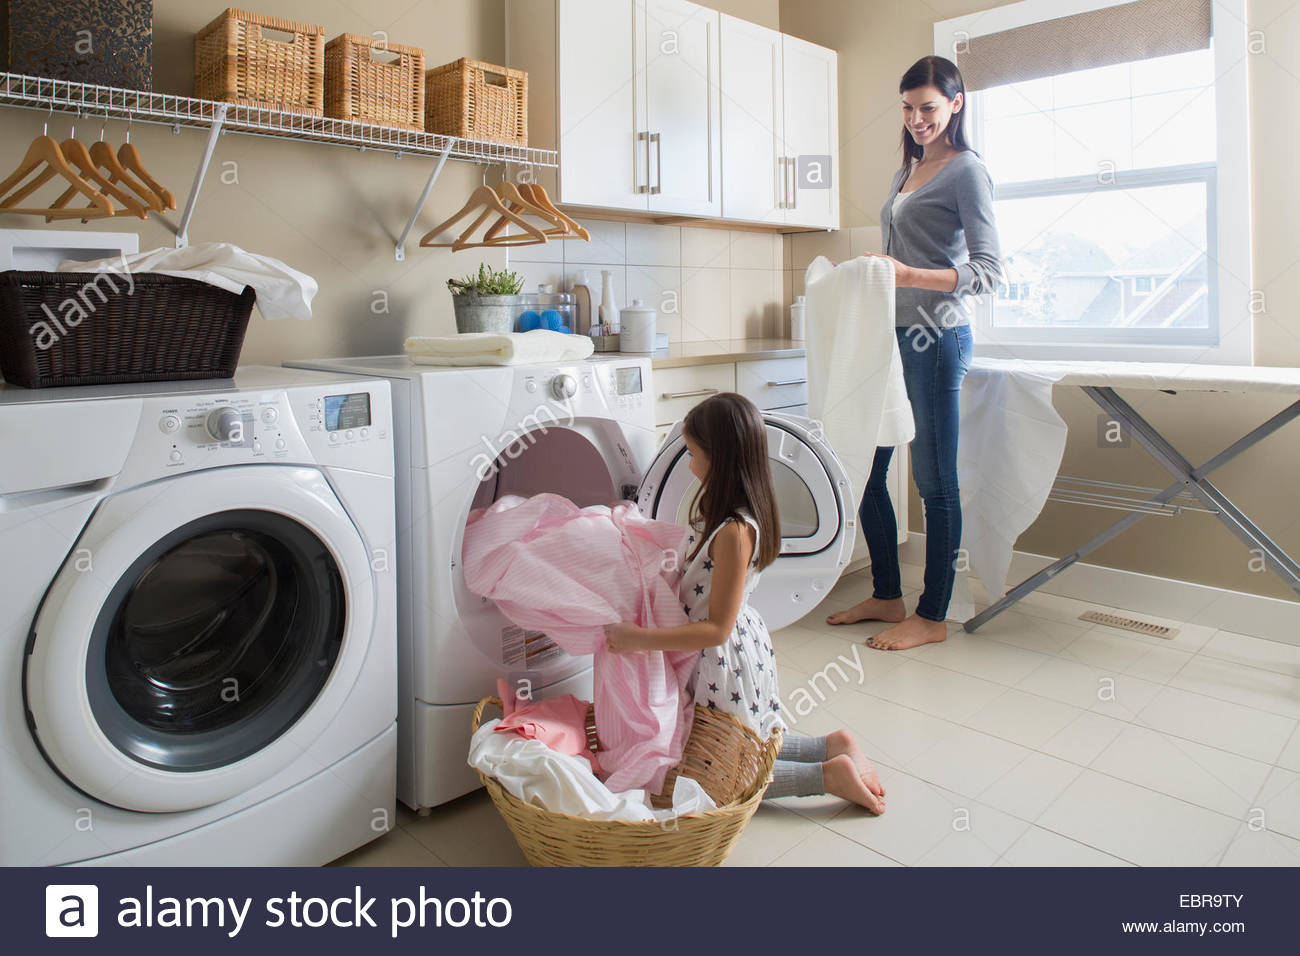 Mother and daughter in laundry room Stock Photo